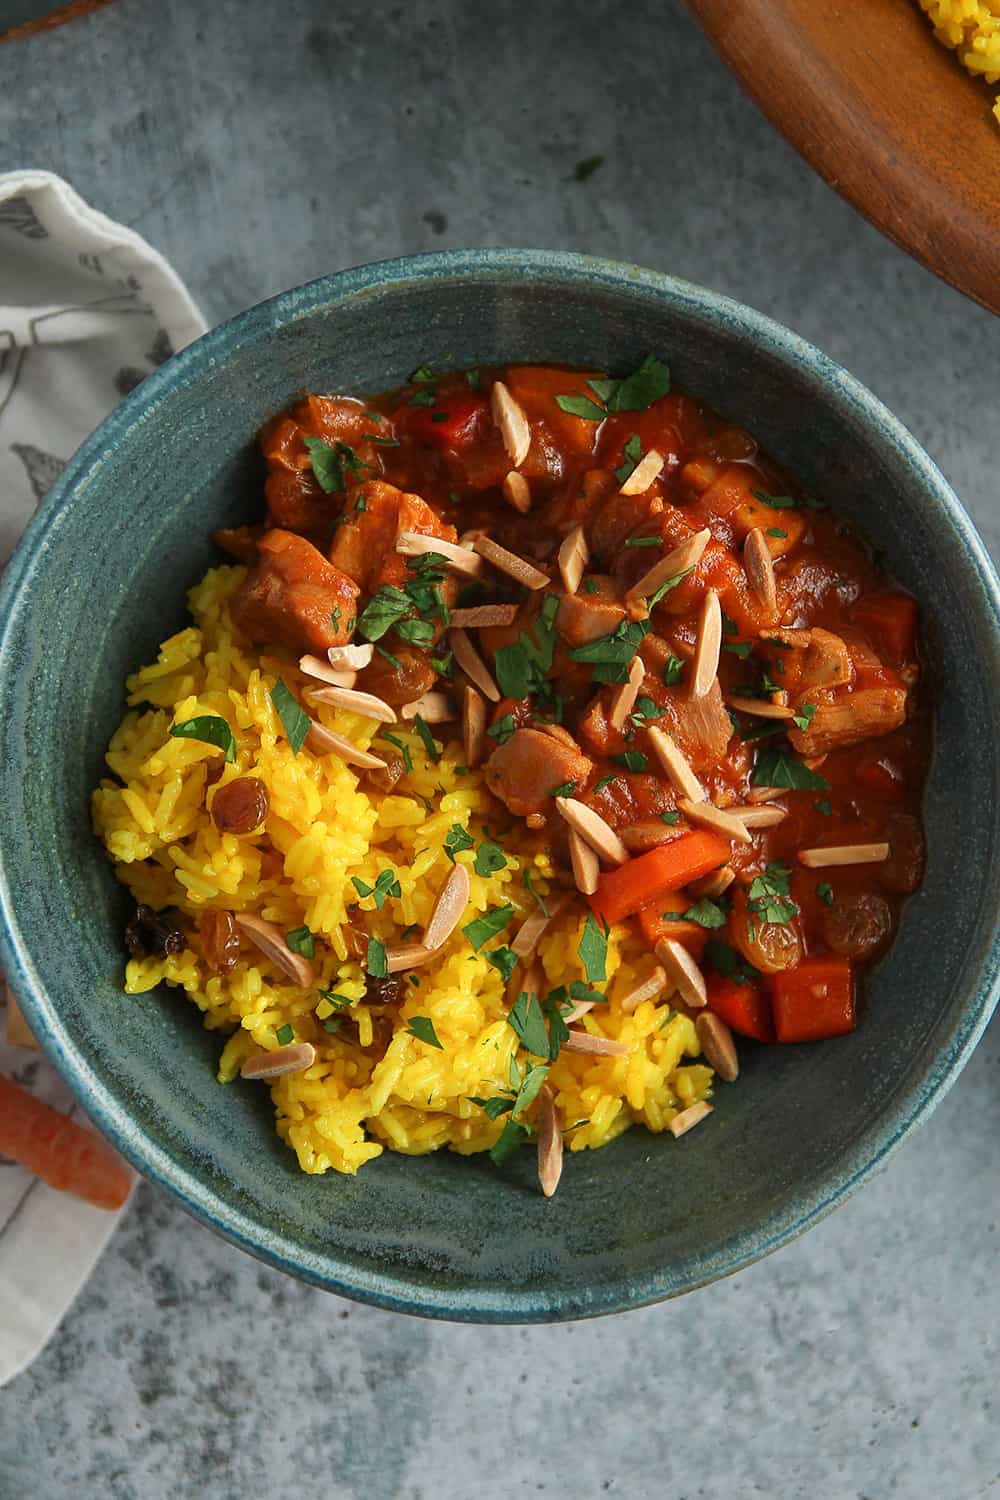 Serve Quick Moroccan Chicken Stew alongside ginger-turmeric rice for a complete meal.